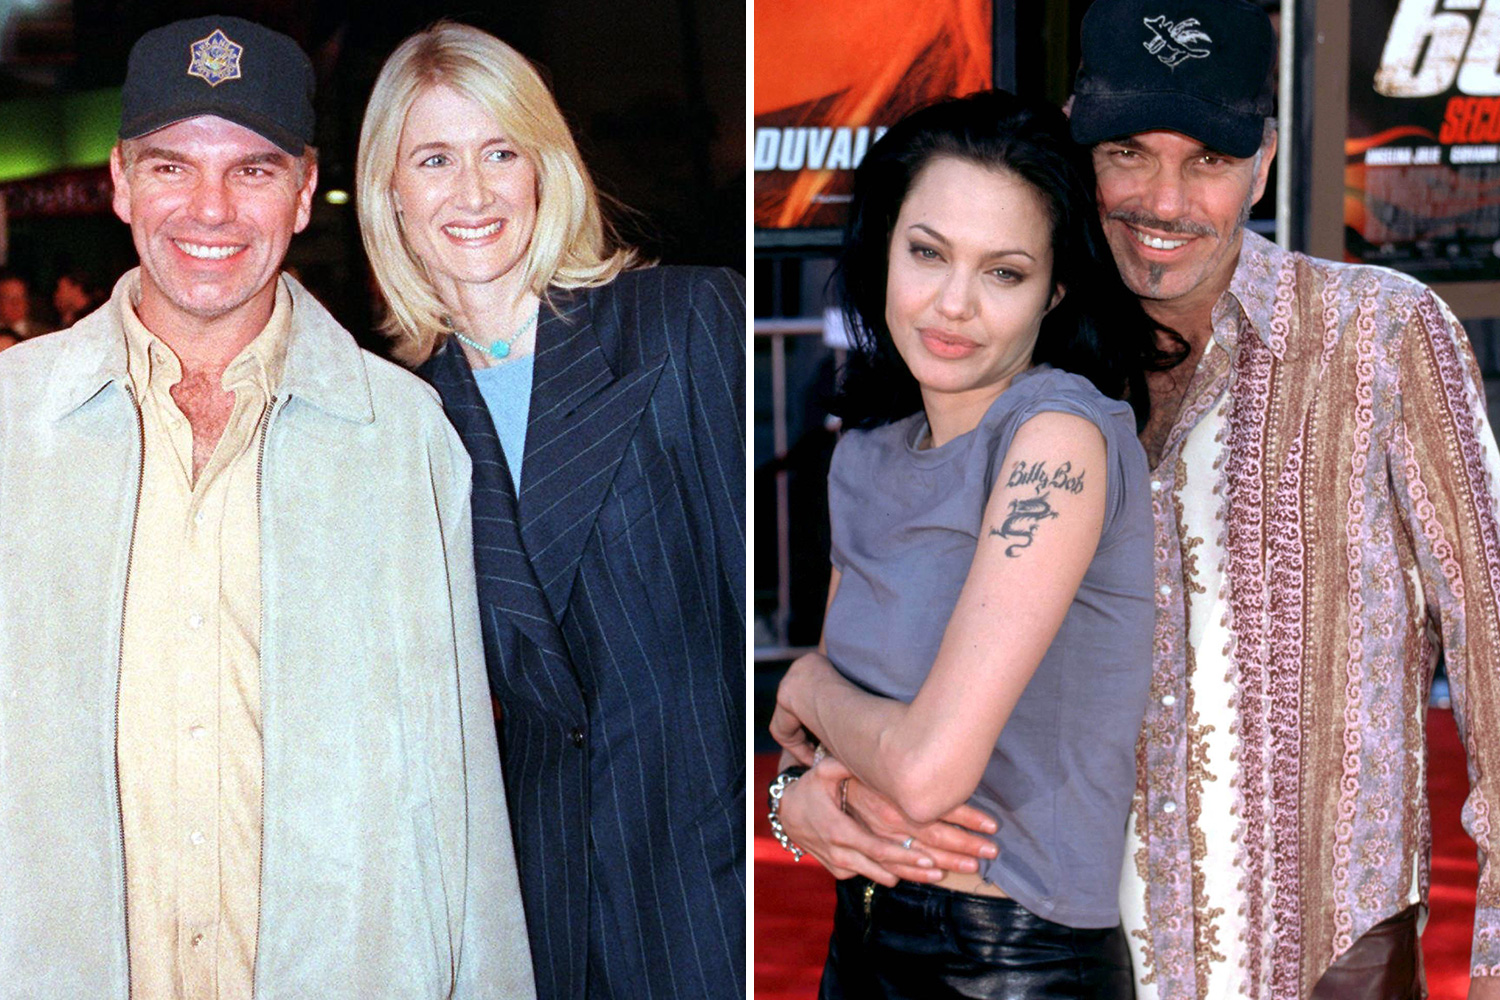 Billy Bob Thornton married his fiancé while he was engaged to Laura Dern